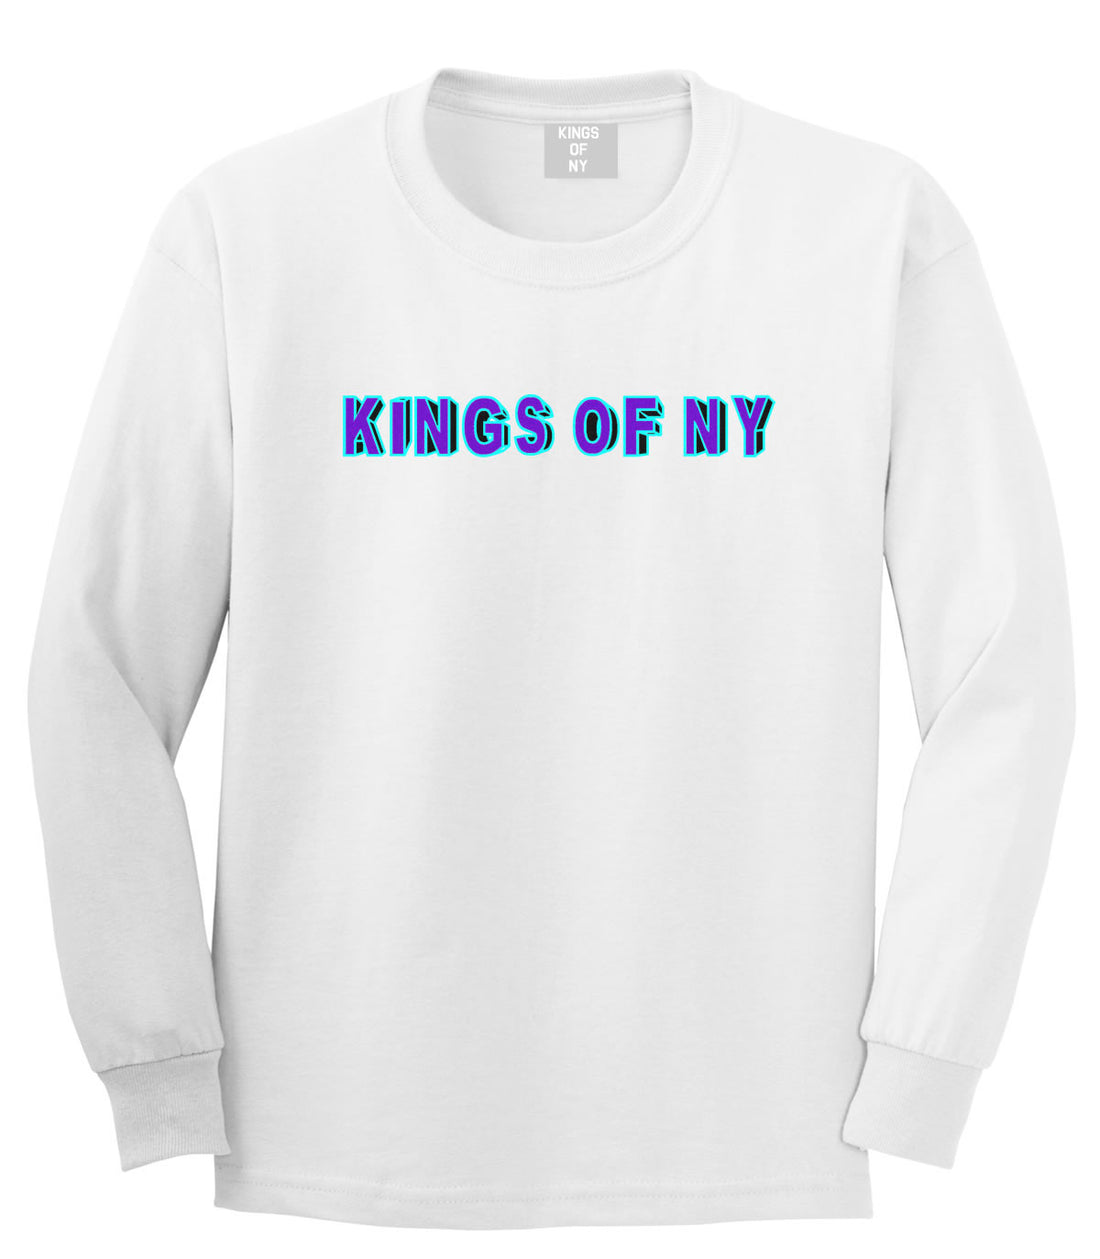 Bright Block Letters Long Sleeve T-Shirt in White by Kings Of NY